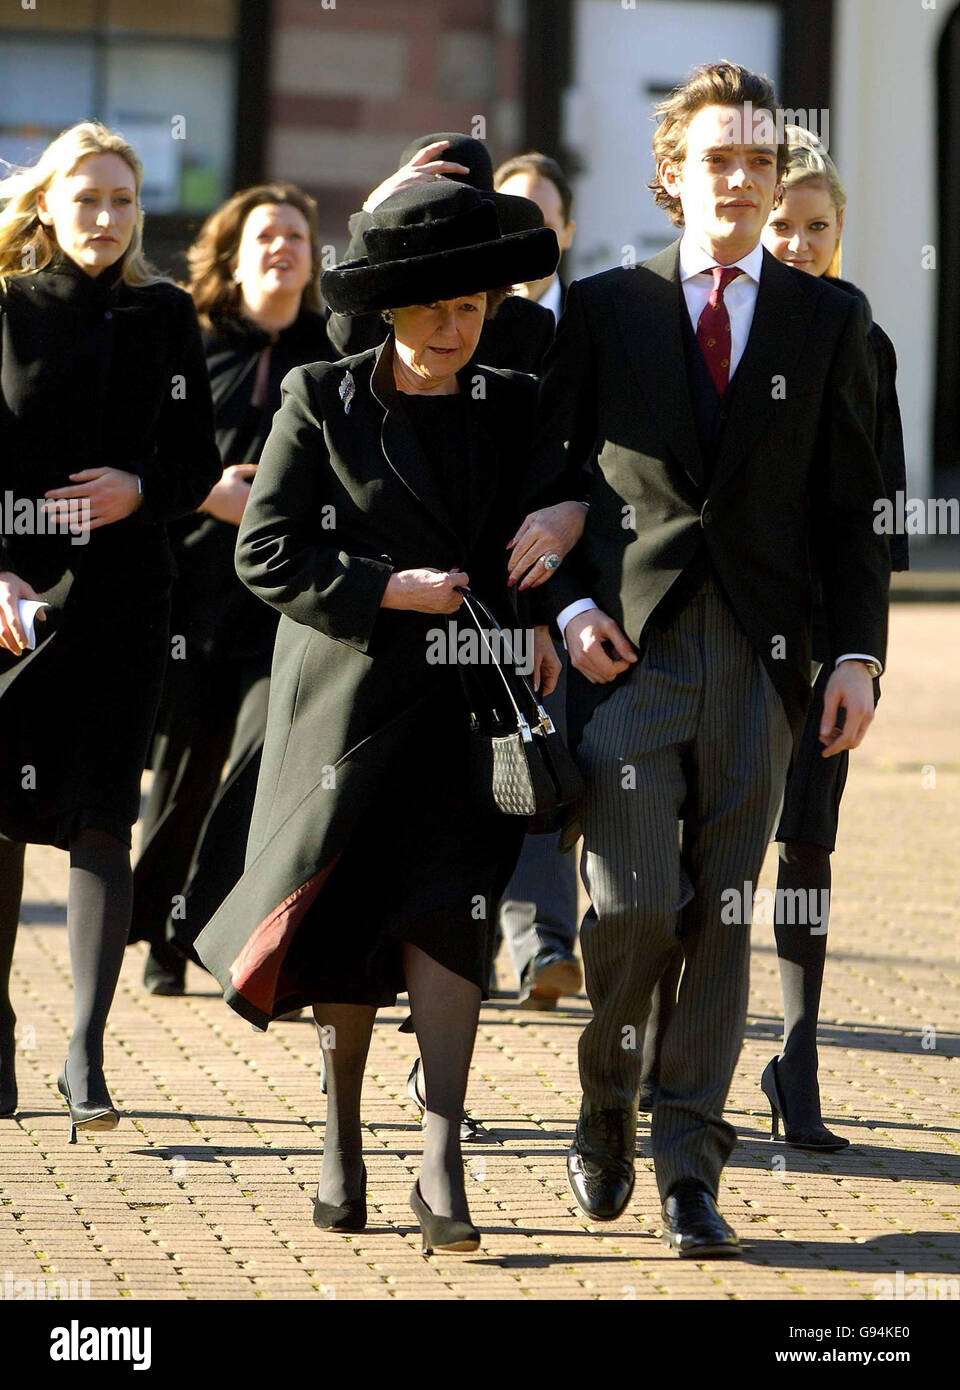 The sixth Earl of Lichfield (Anson) and the late Lord Lichfield's sister Lady Elizabeth Shakerley arrive for his Service of Thanksgiving at Lichfield Cathedral, Thursday February 9, 2006. The 66-year-old, who was the Queen's first cousin once removed, died suddenly in November last year after suffering a stroke. See PA Story MEMORIAL Lichfield. PRESS ASSOCIATION Photo. Photo credit should read: Rui Vieira/PA Stock Photo